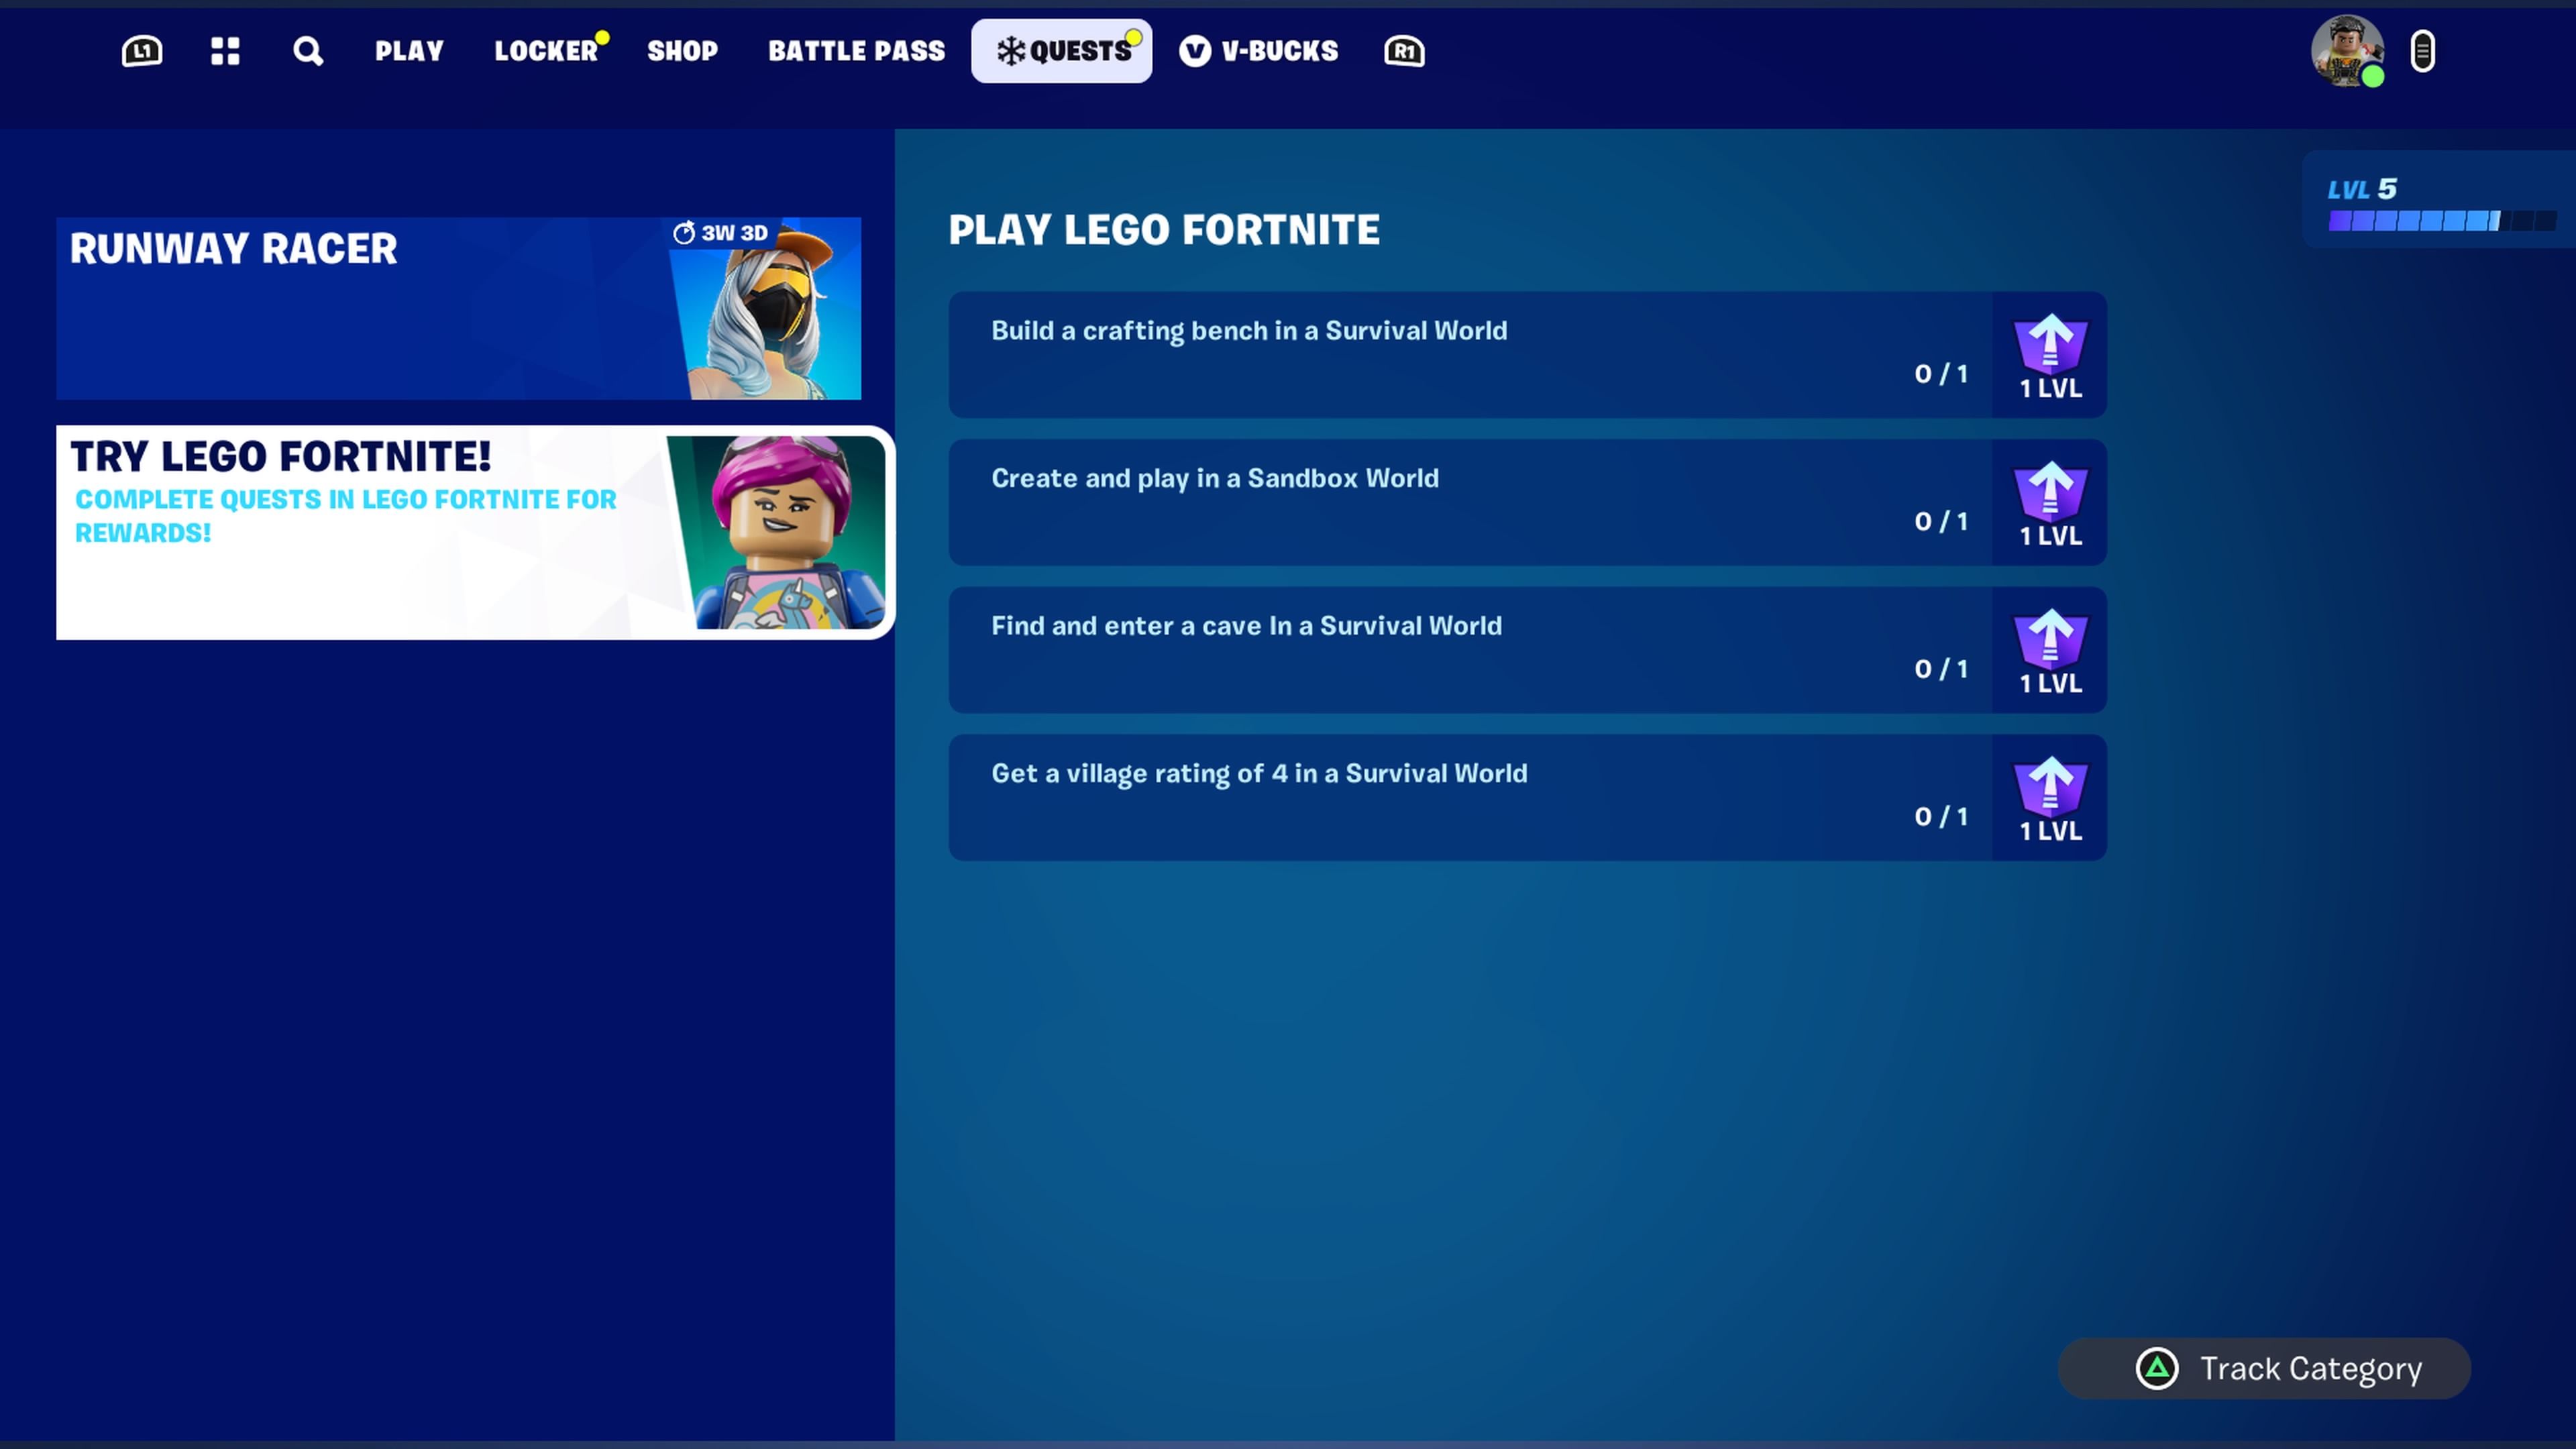 The menu list of the Lego Fortnite quests.